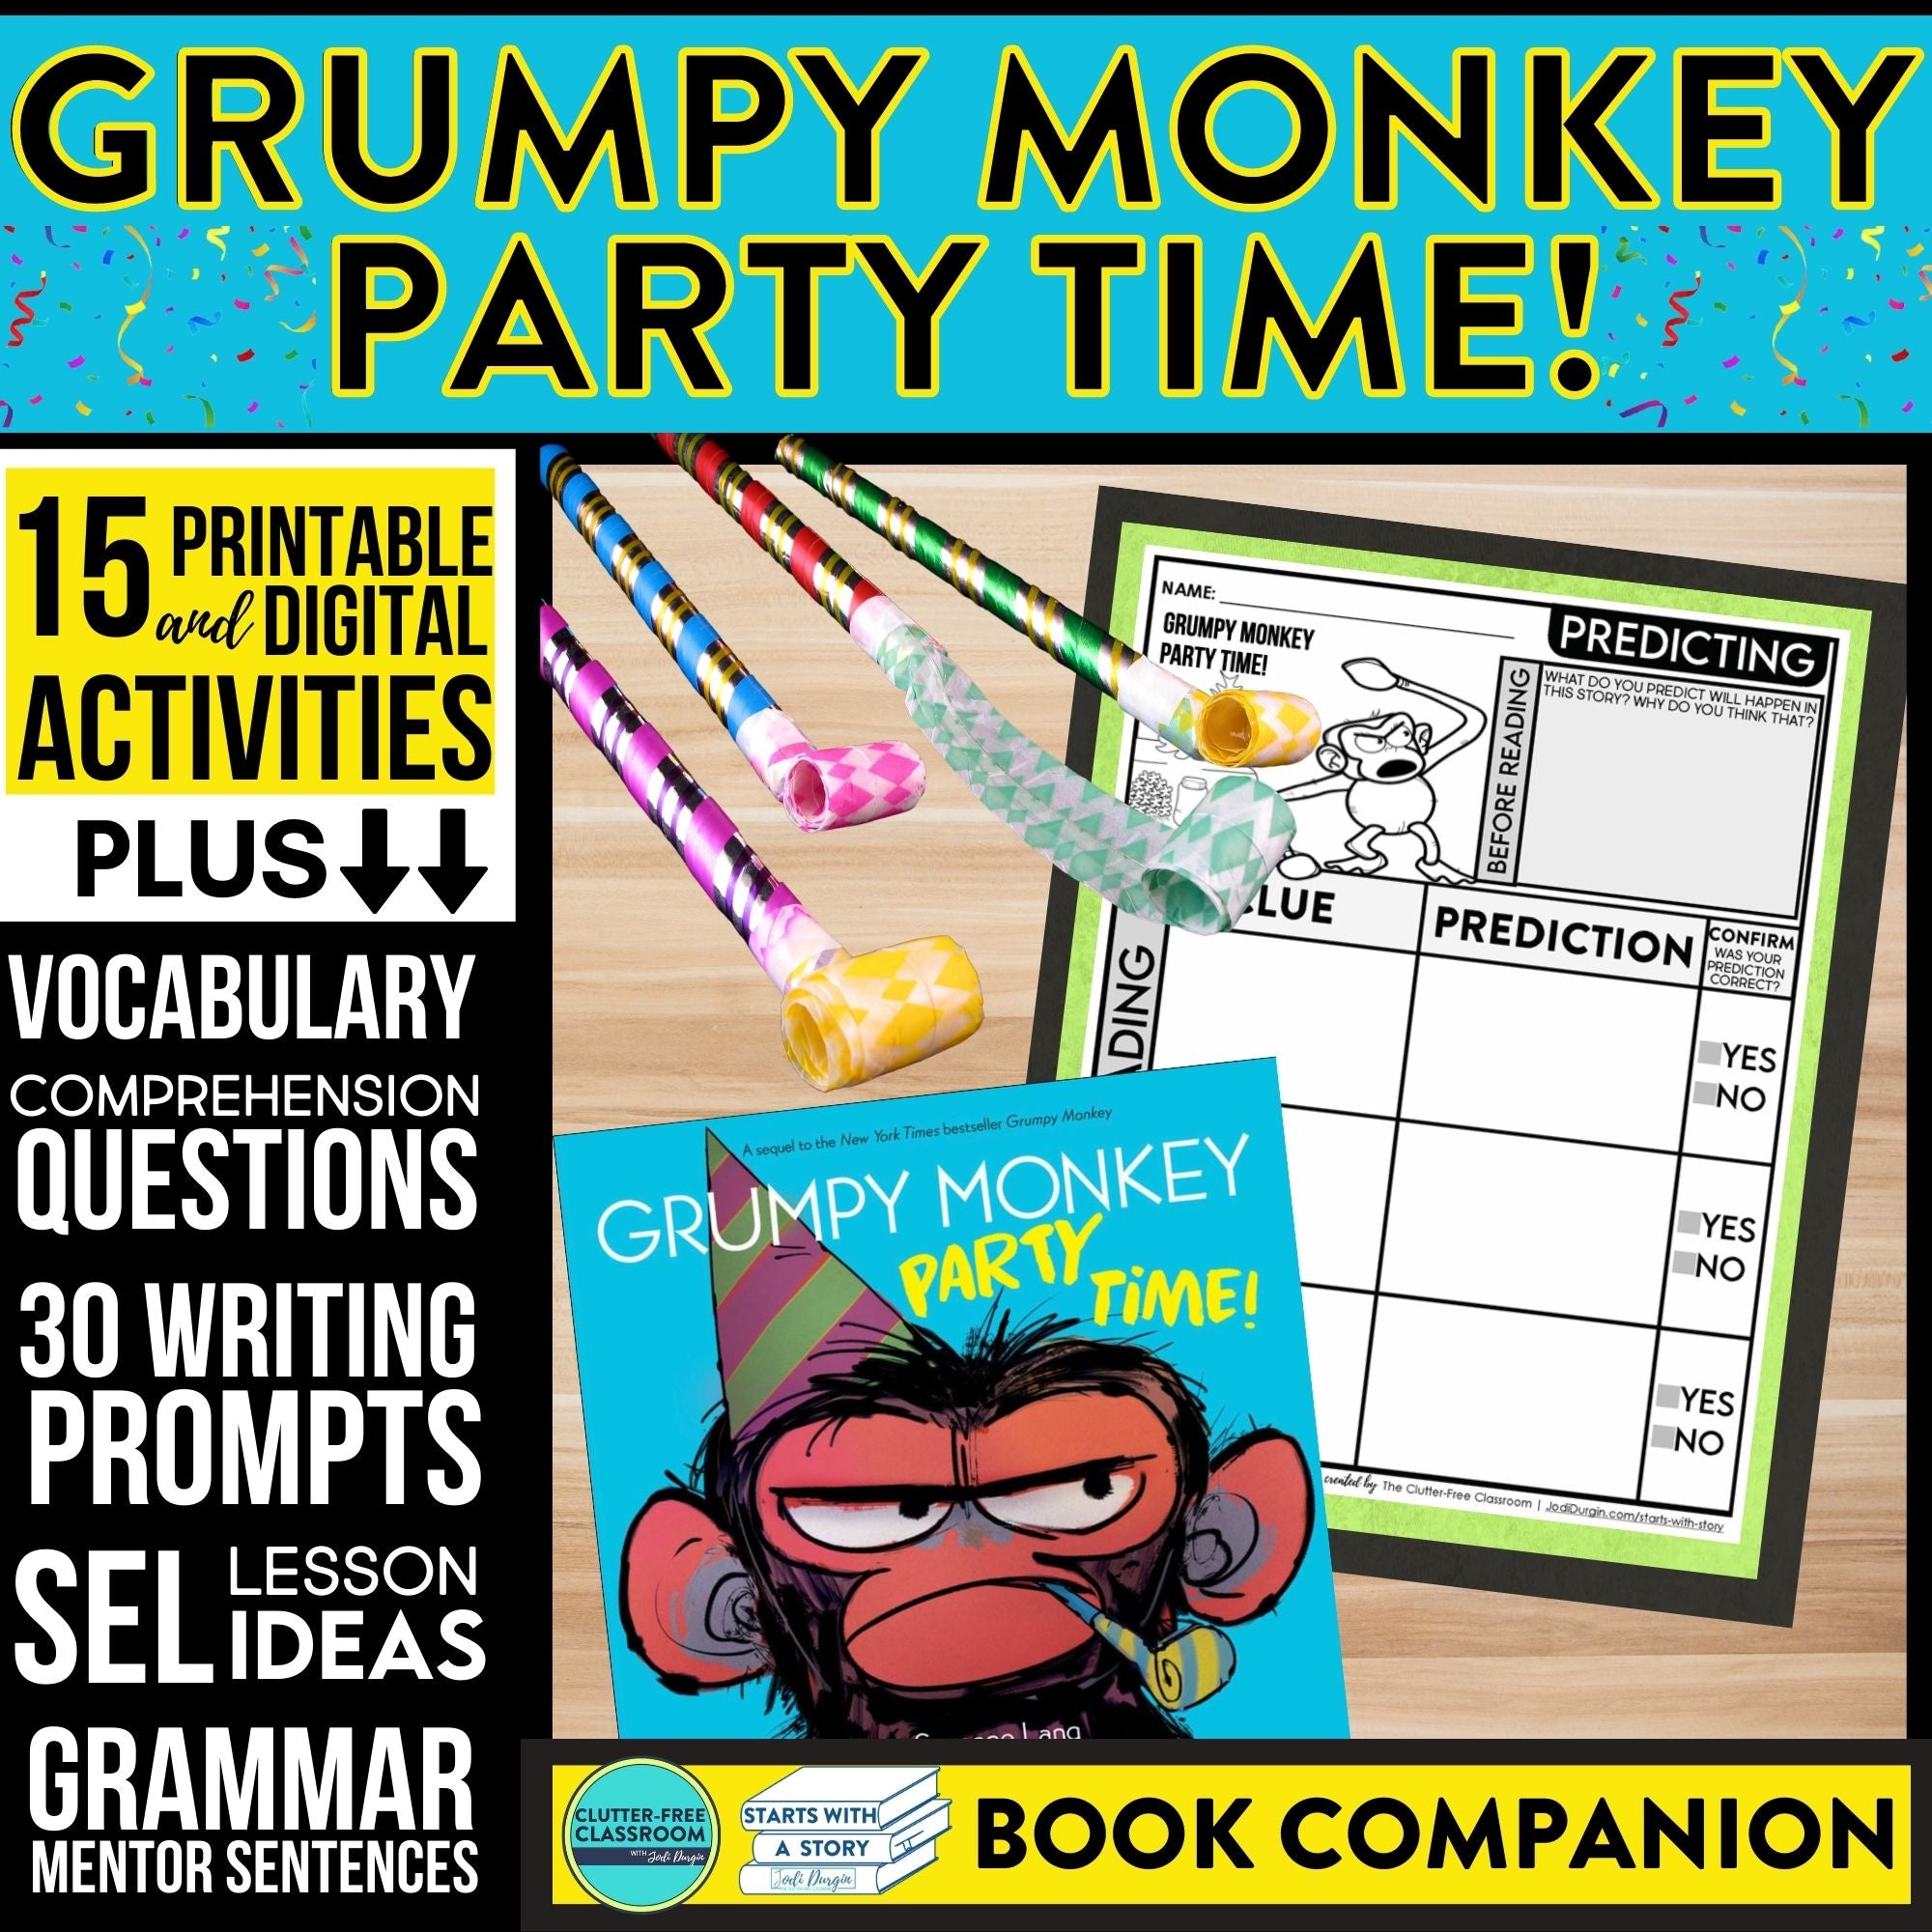 GRUMPY MONKEY PARTY TIME activities and lesson plan ideas